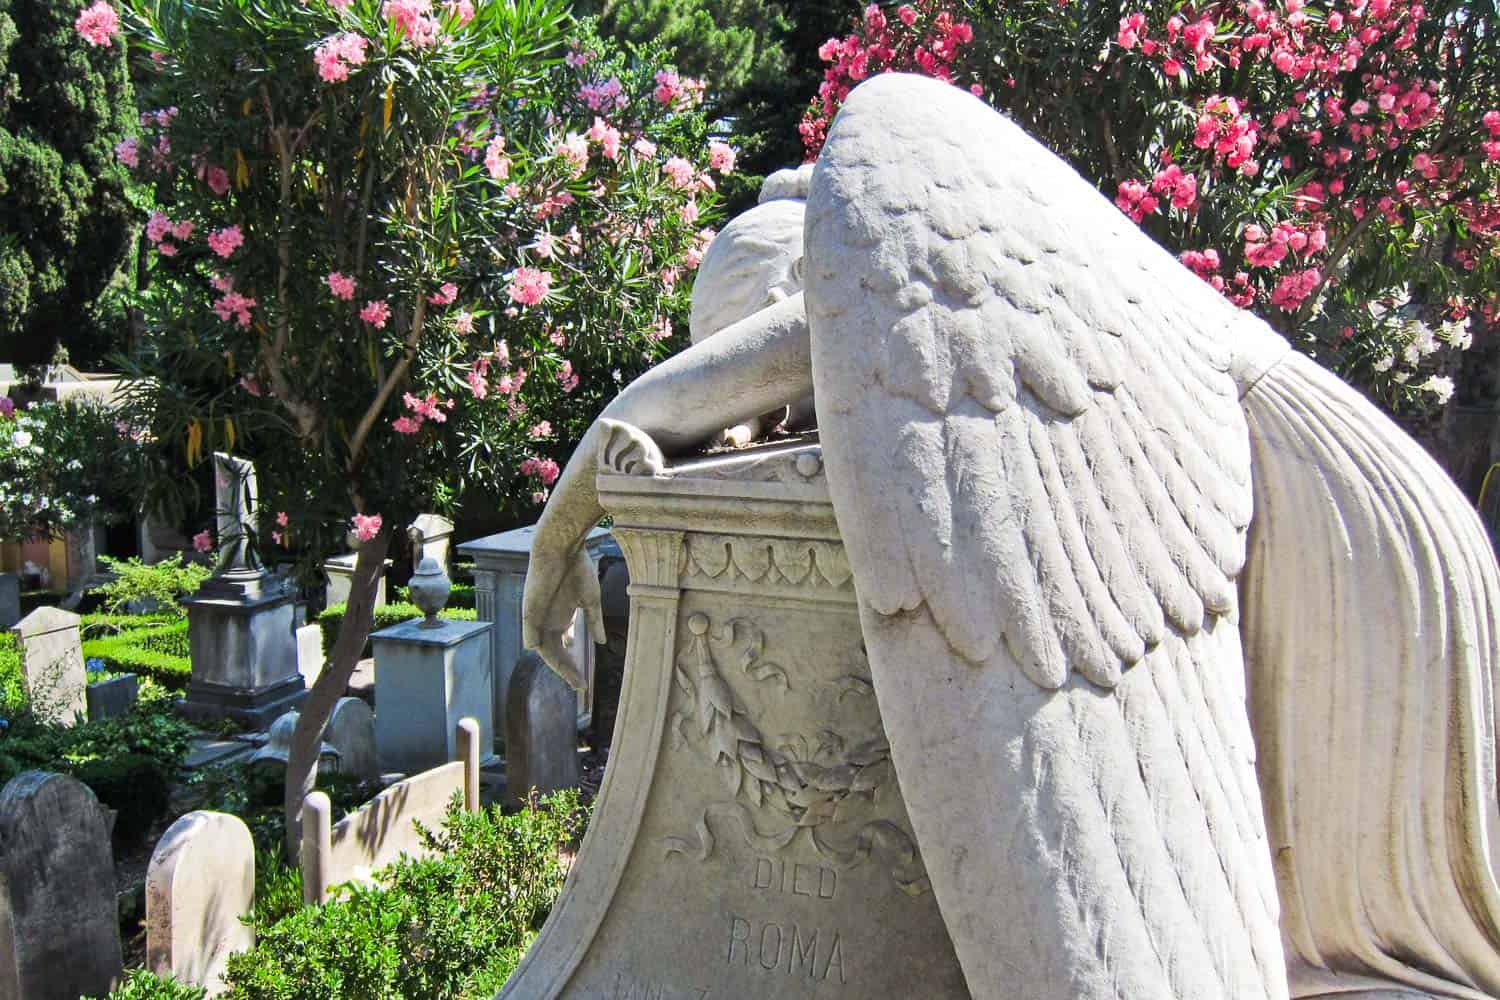 Angel on Emelyn Story's grave in non-Catholic cemetery in Testaccio, Rome